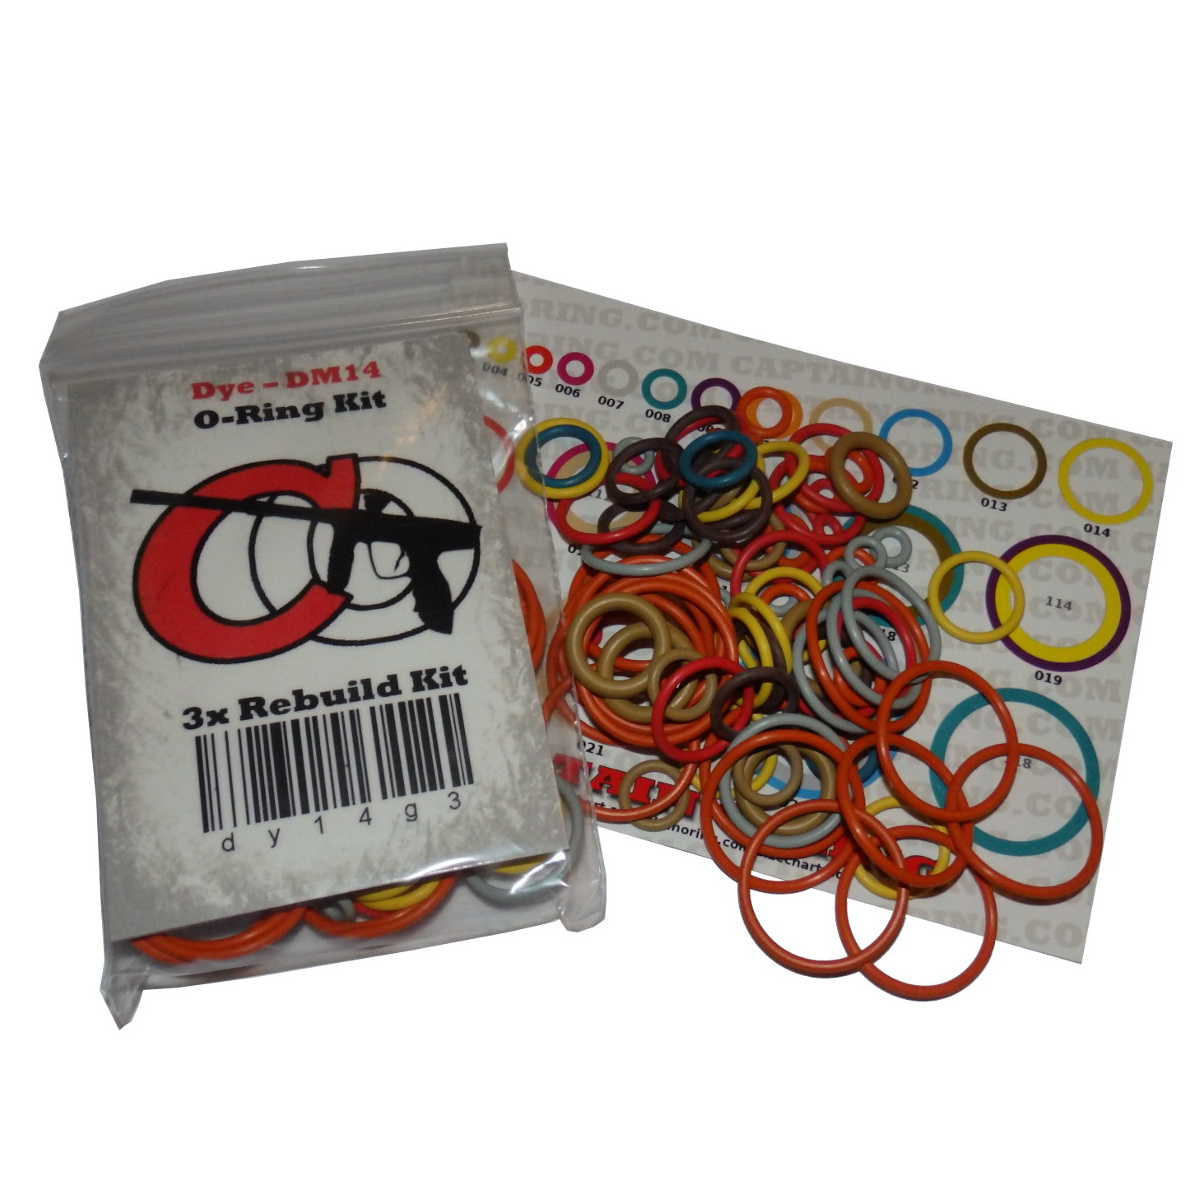 TPX Deluxe color o-ring kit W/ 300 Tippmann TiPX orings by Flasc Paintball 